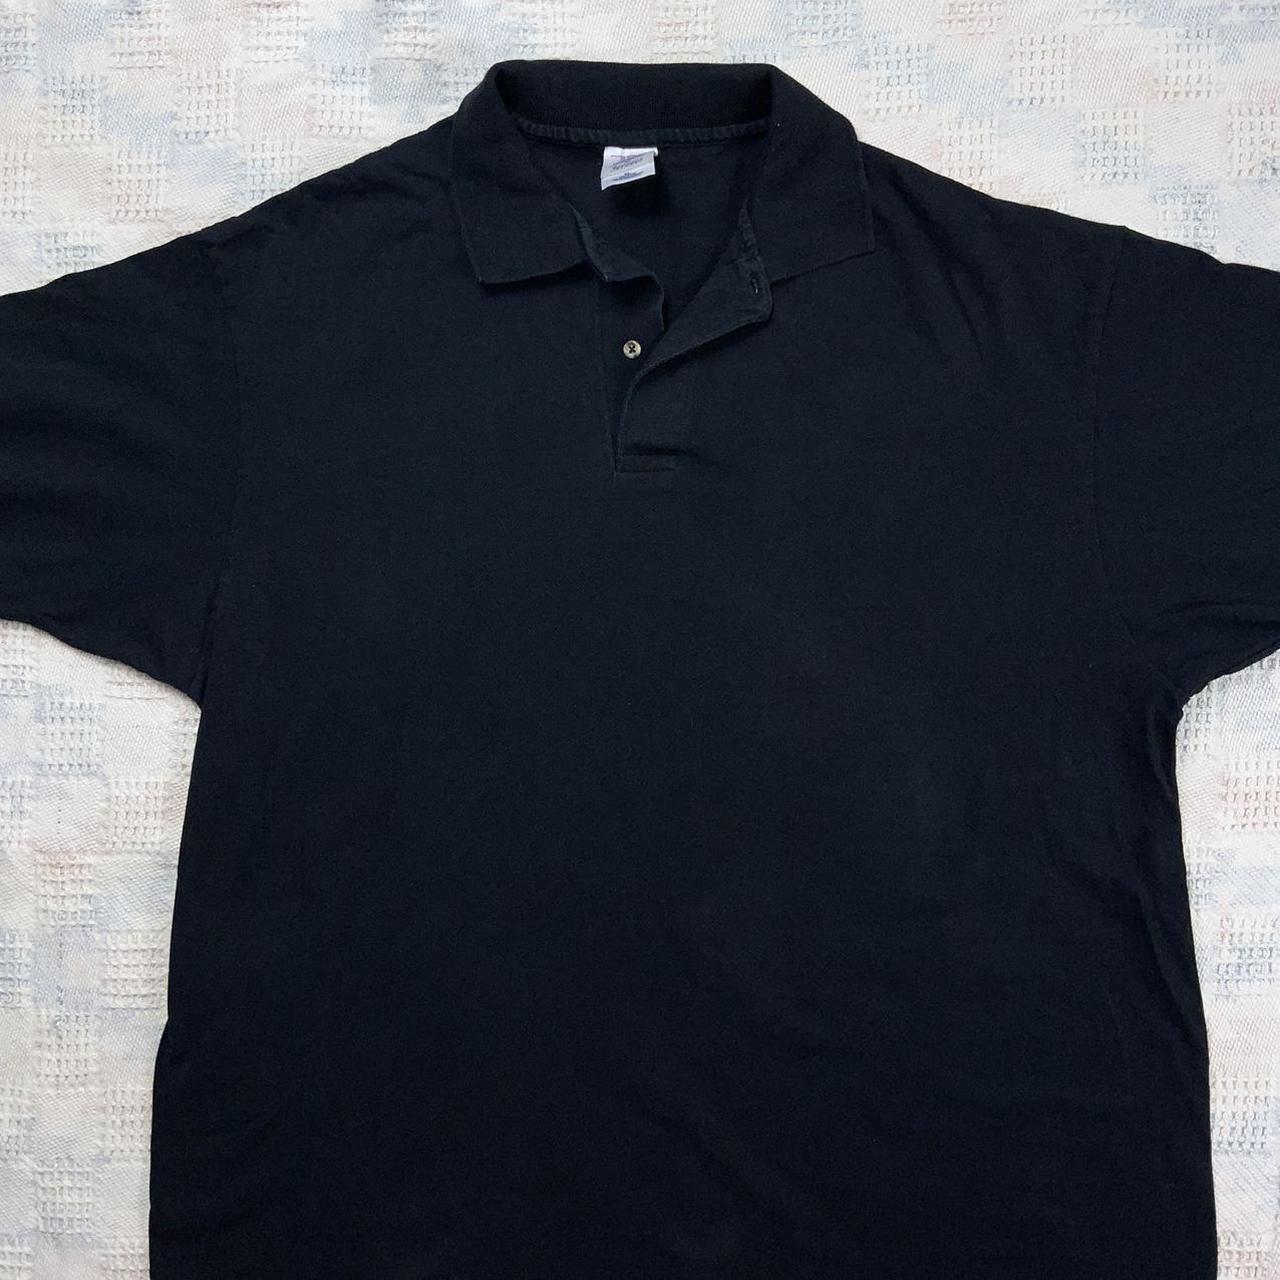 MIDNIGHT CRUISERS POLO SHIRT. THE FRONT OF THE SHIRT... - Depop